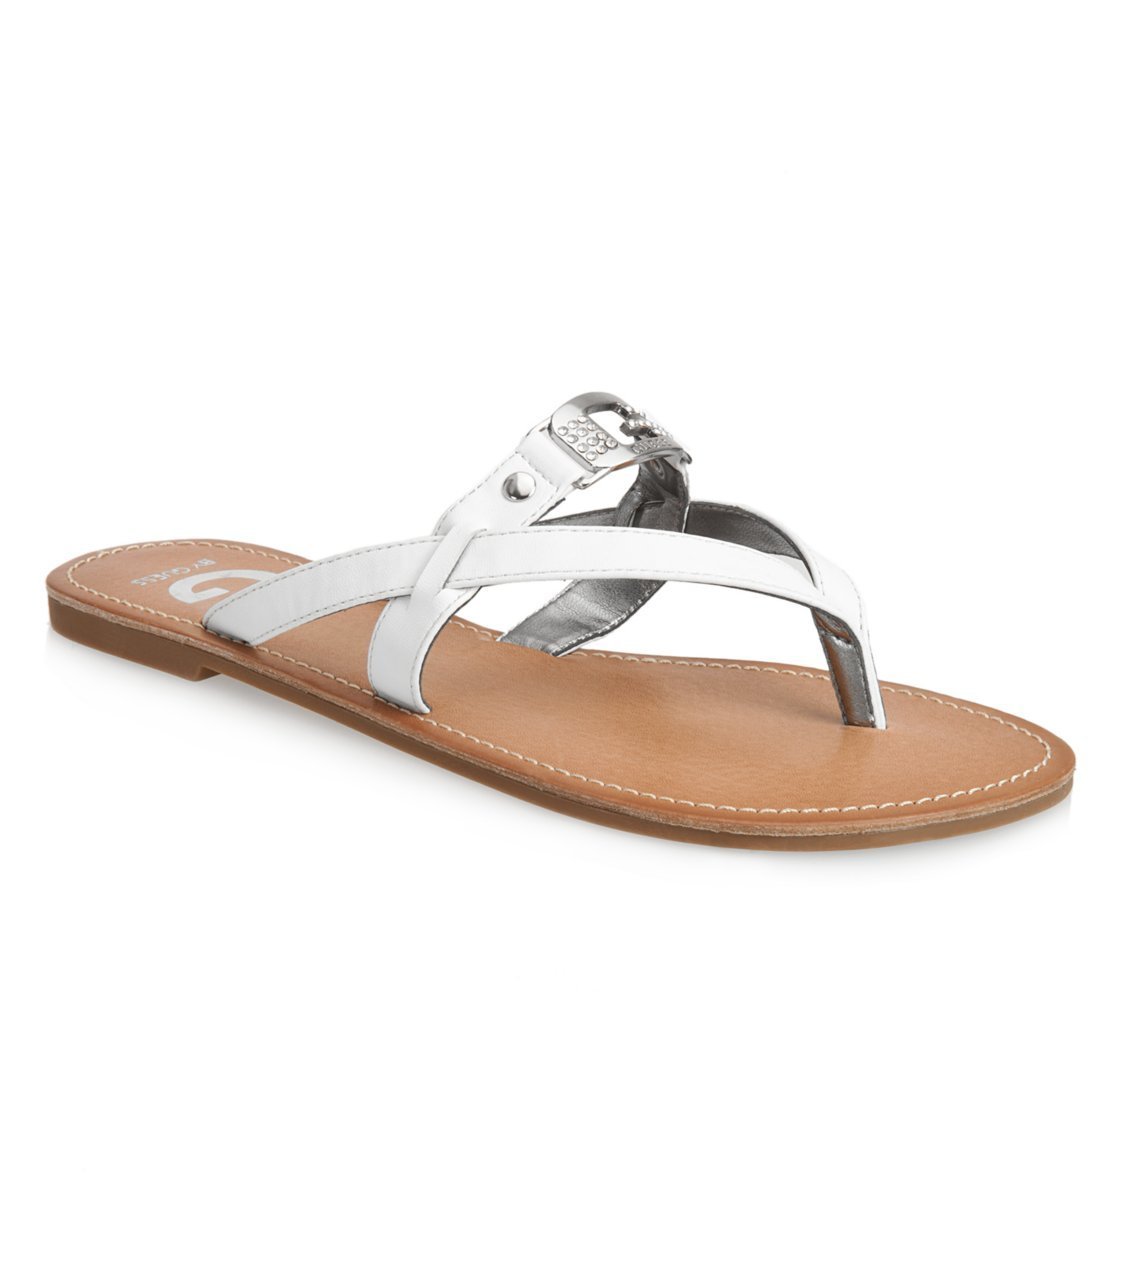 Aimee's Picks for the Best Designs of Elegant Thongs and Sandals ...